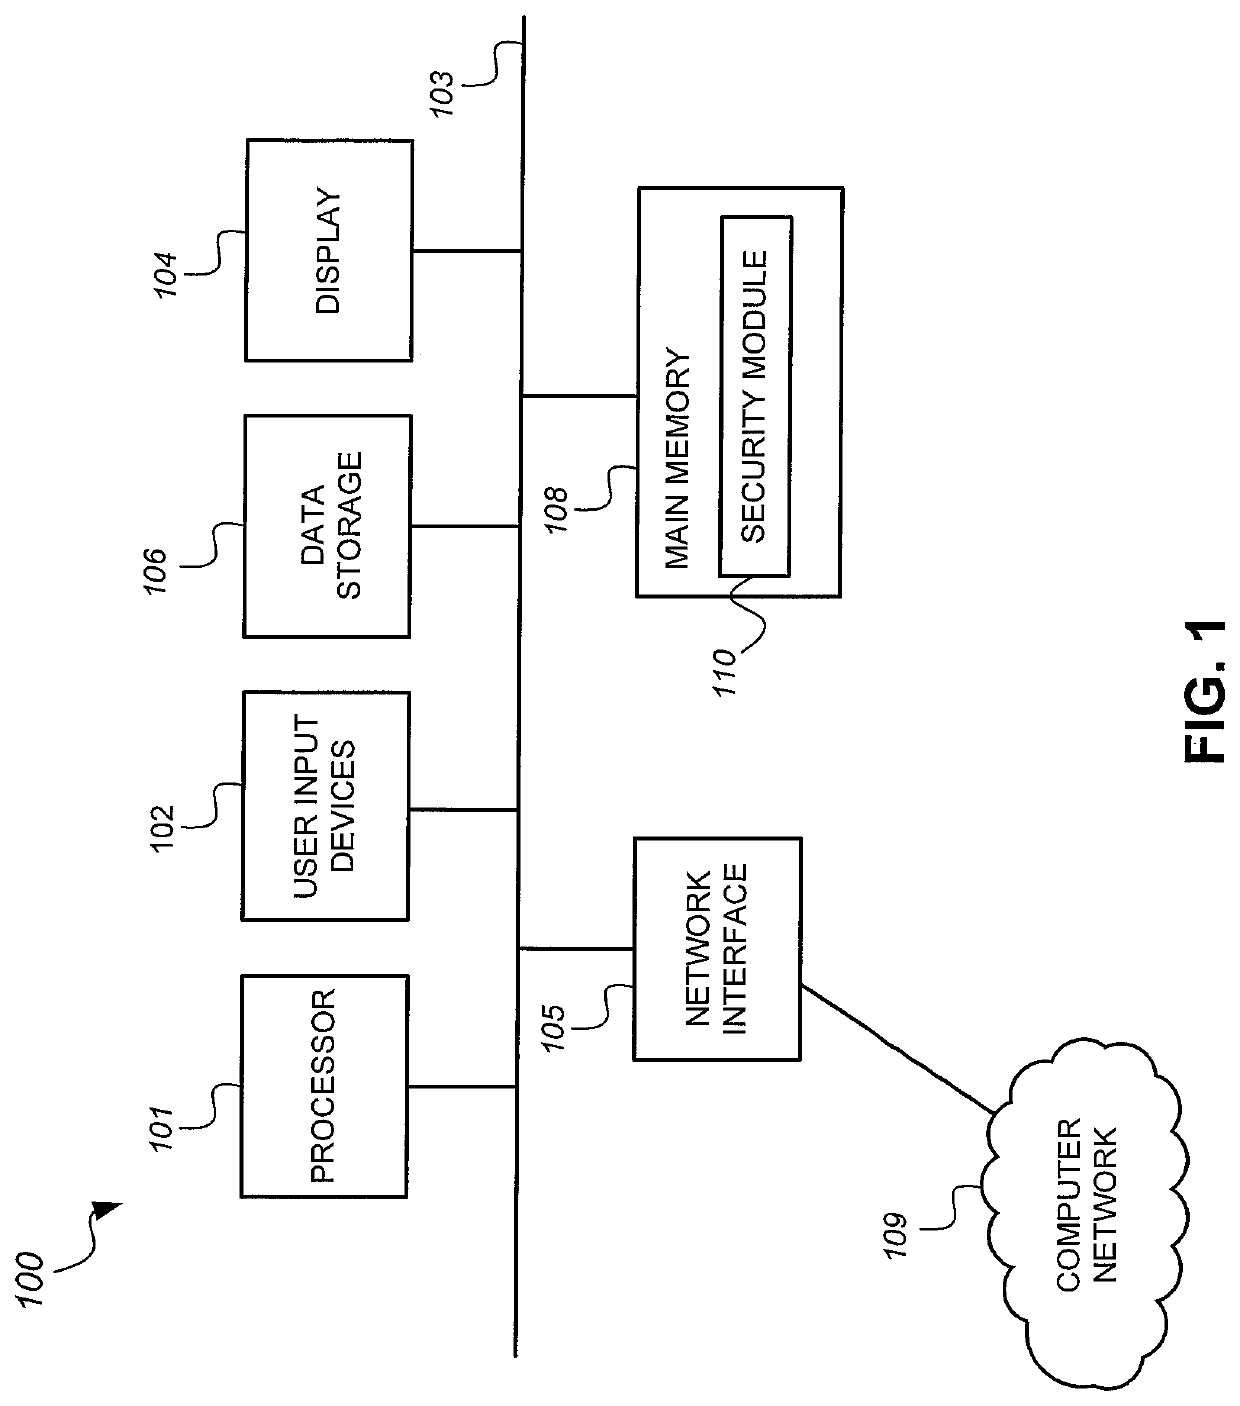 Systems and methods for detecting and responding to anomalous messaging and compromised accounts